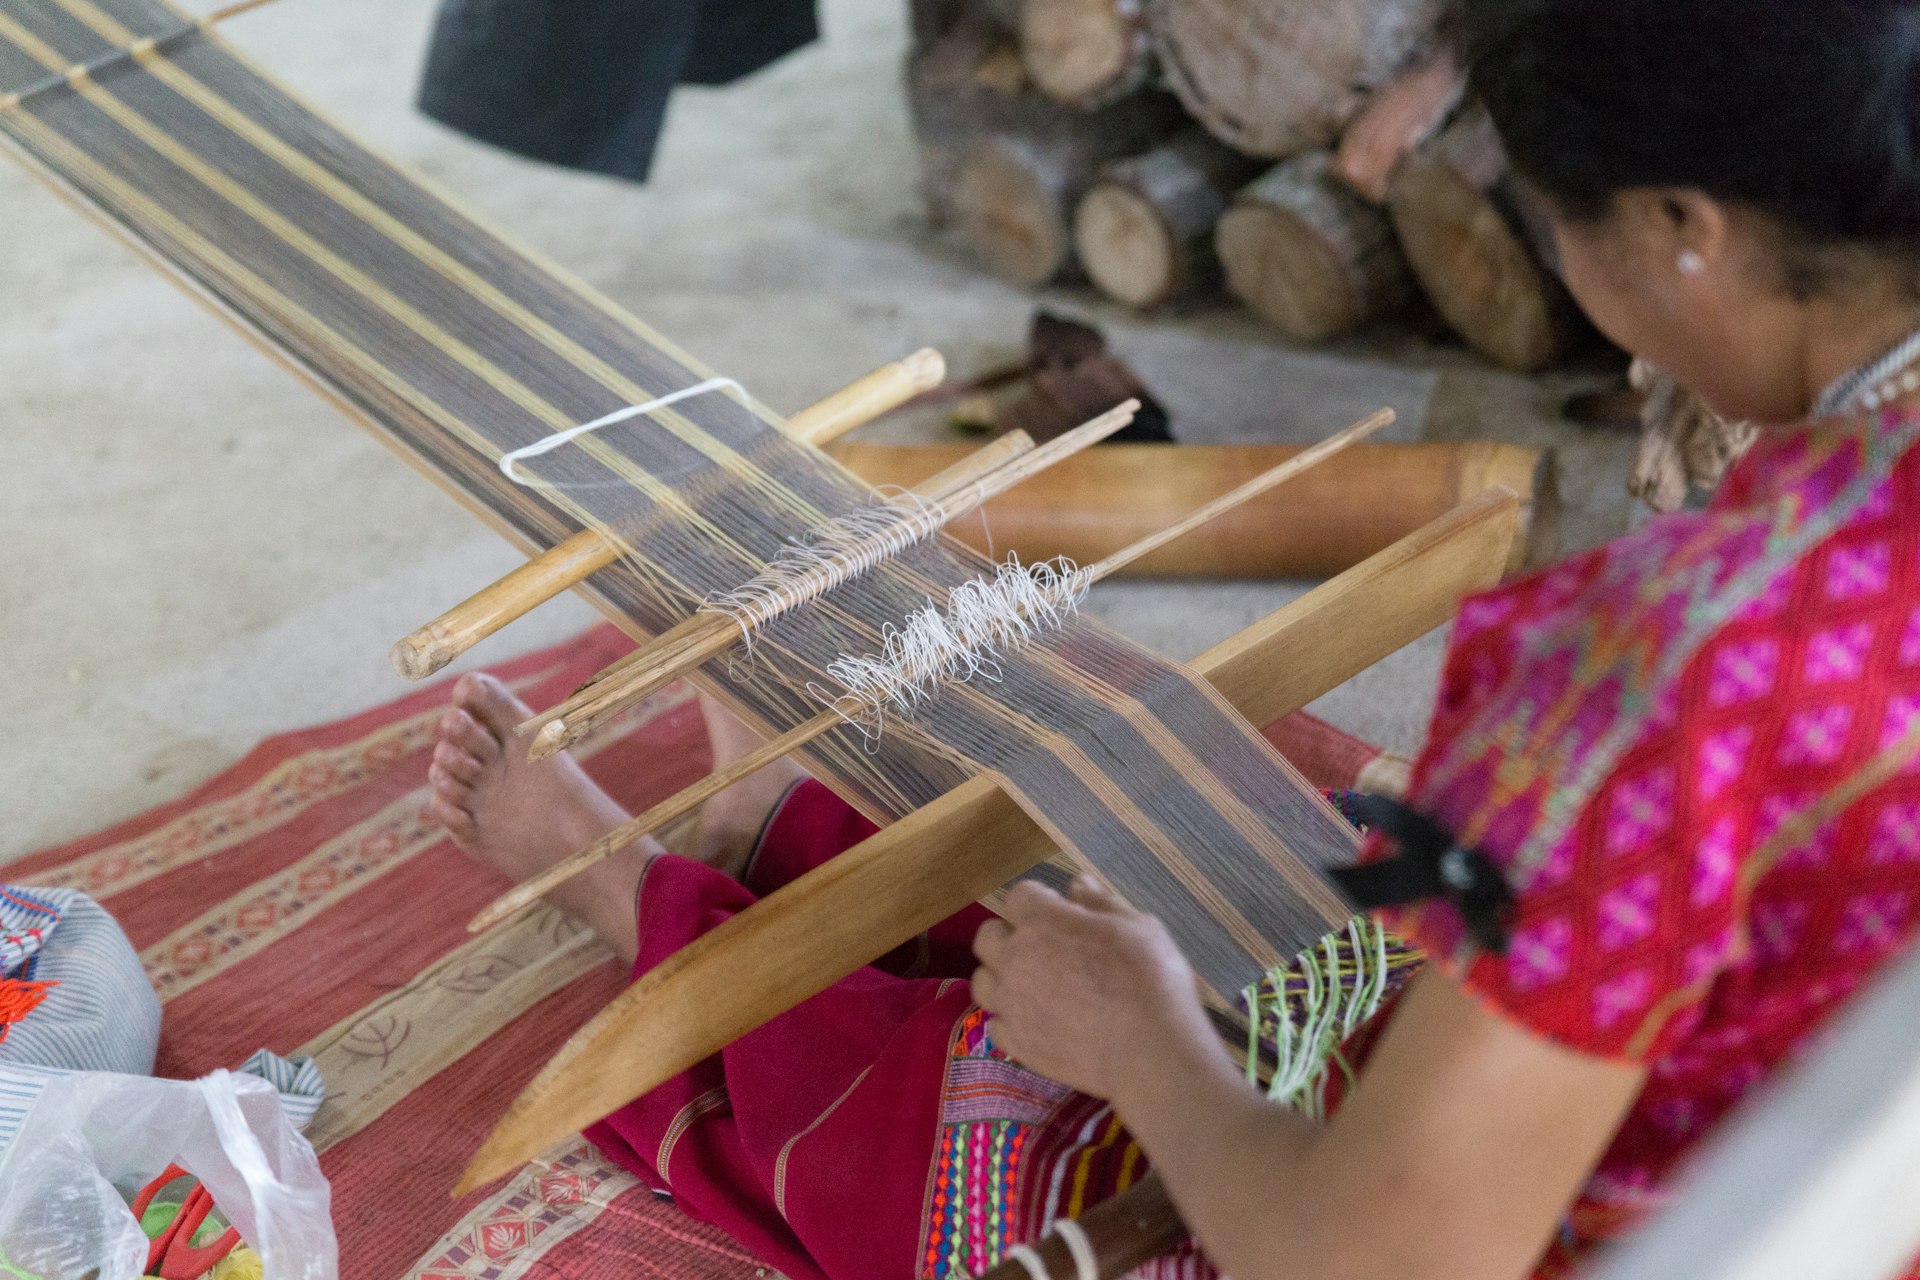 A woman is sitting on the floor and using a traditional loom to weave fabric